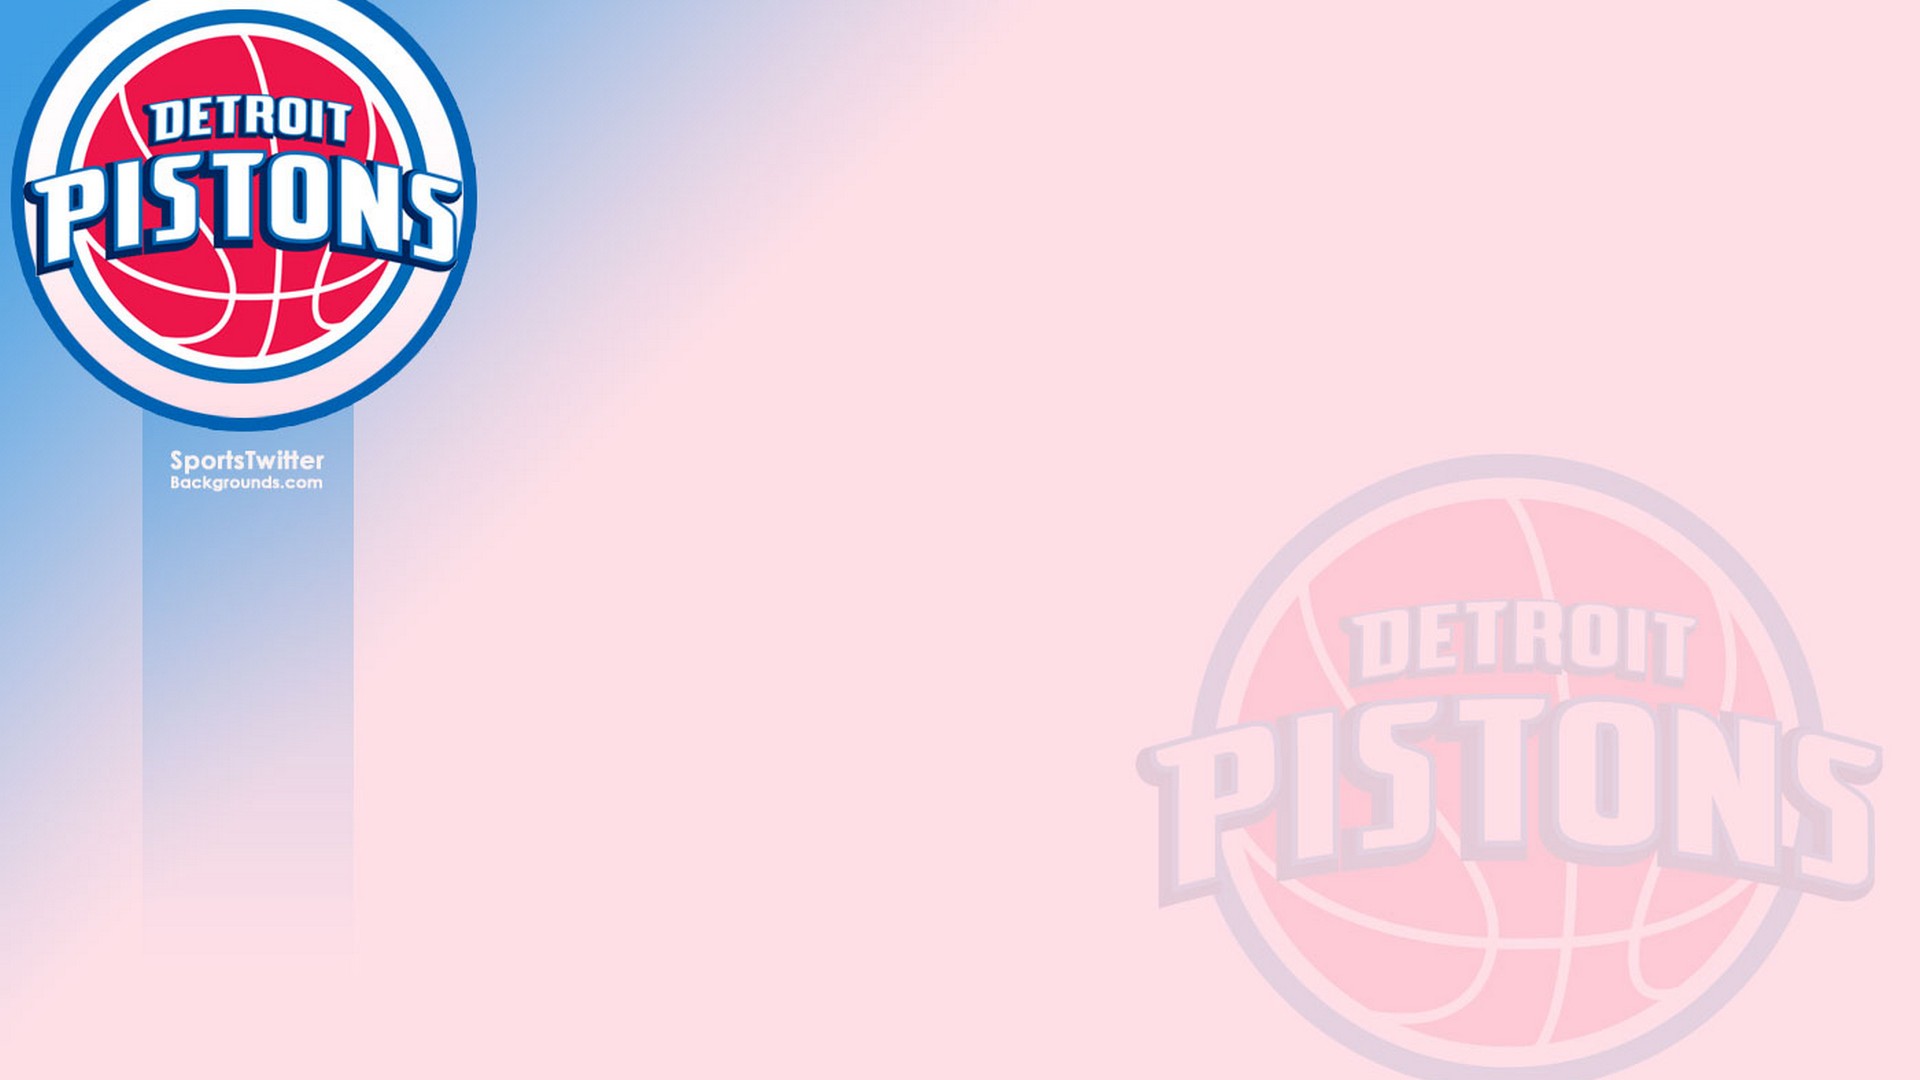 Detroit Pistons Logo Desktop Wallpapers with high-resolution 1920x1080 pixel. You can use this wallpaper for your Desktop Computer Backgrounds, Windows or Mac Screensavers, iPhone Lock screen, Tablet or Android and another Mobile Phone device